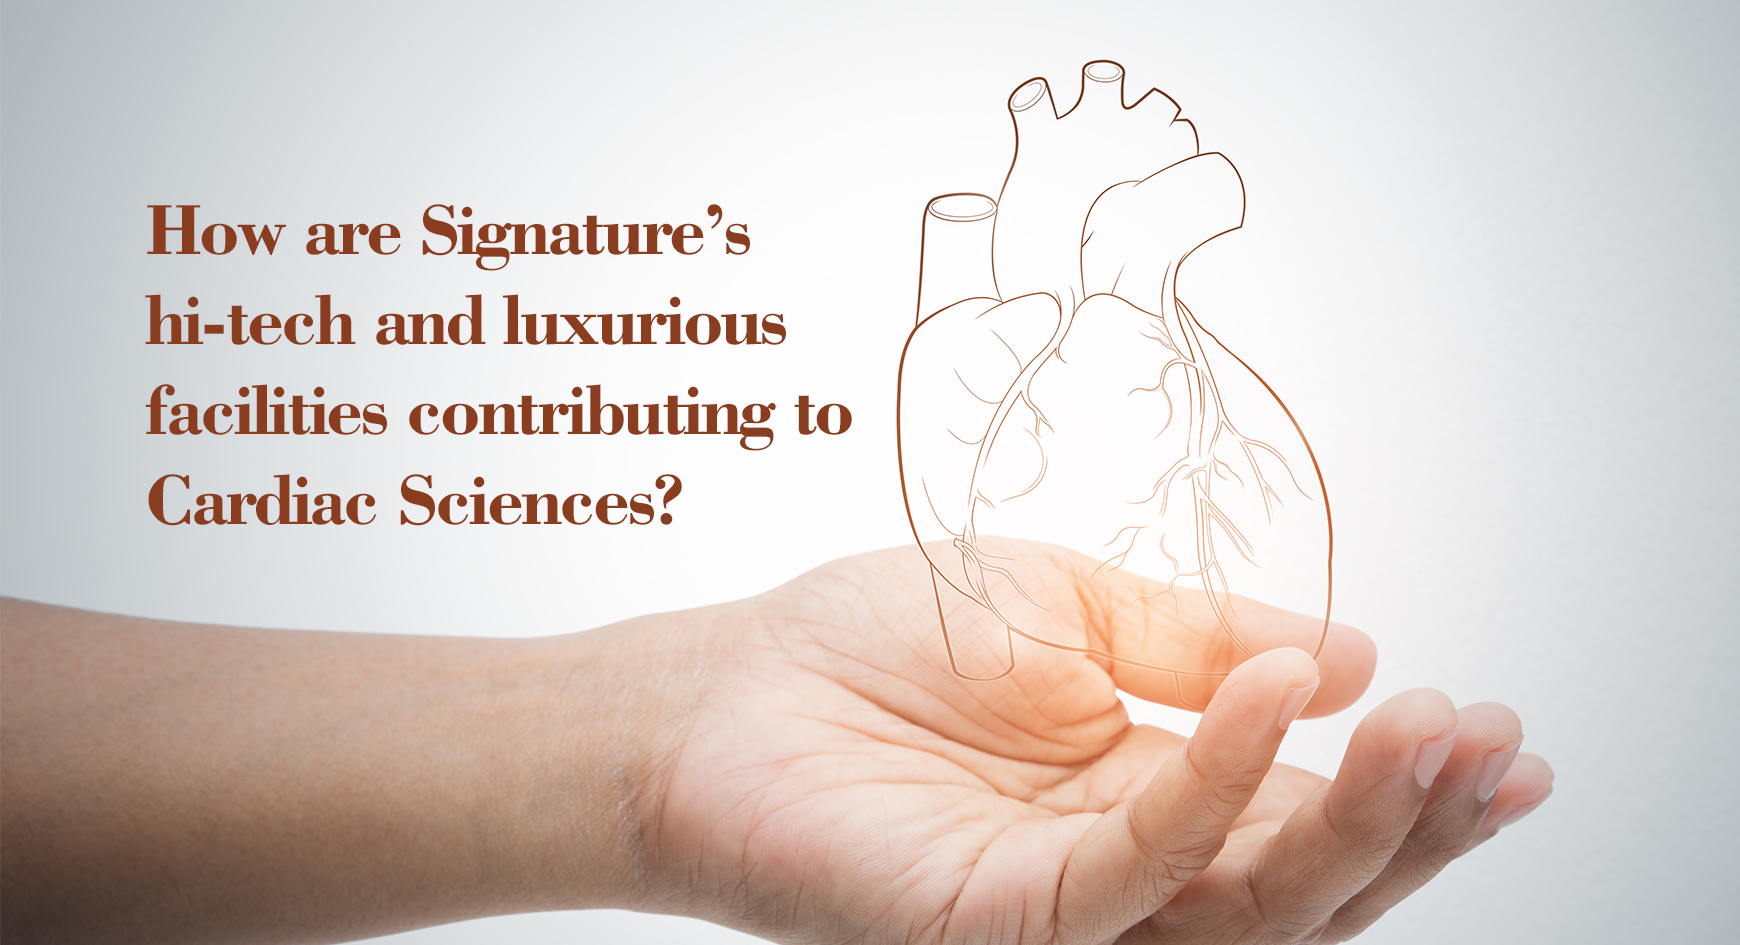 How are Signature’s hi-tech and luxurious facilities contributing to Cardiac Sciences?